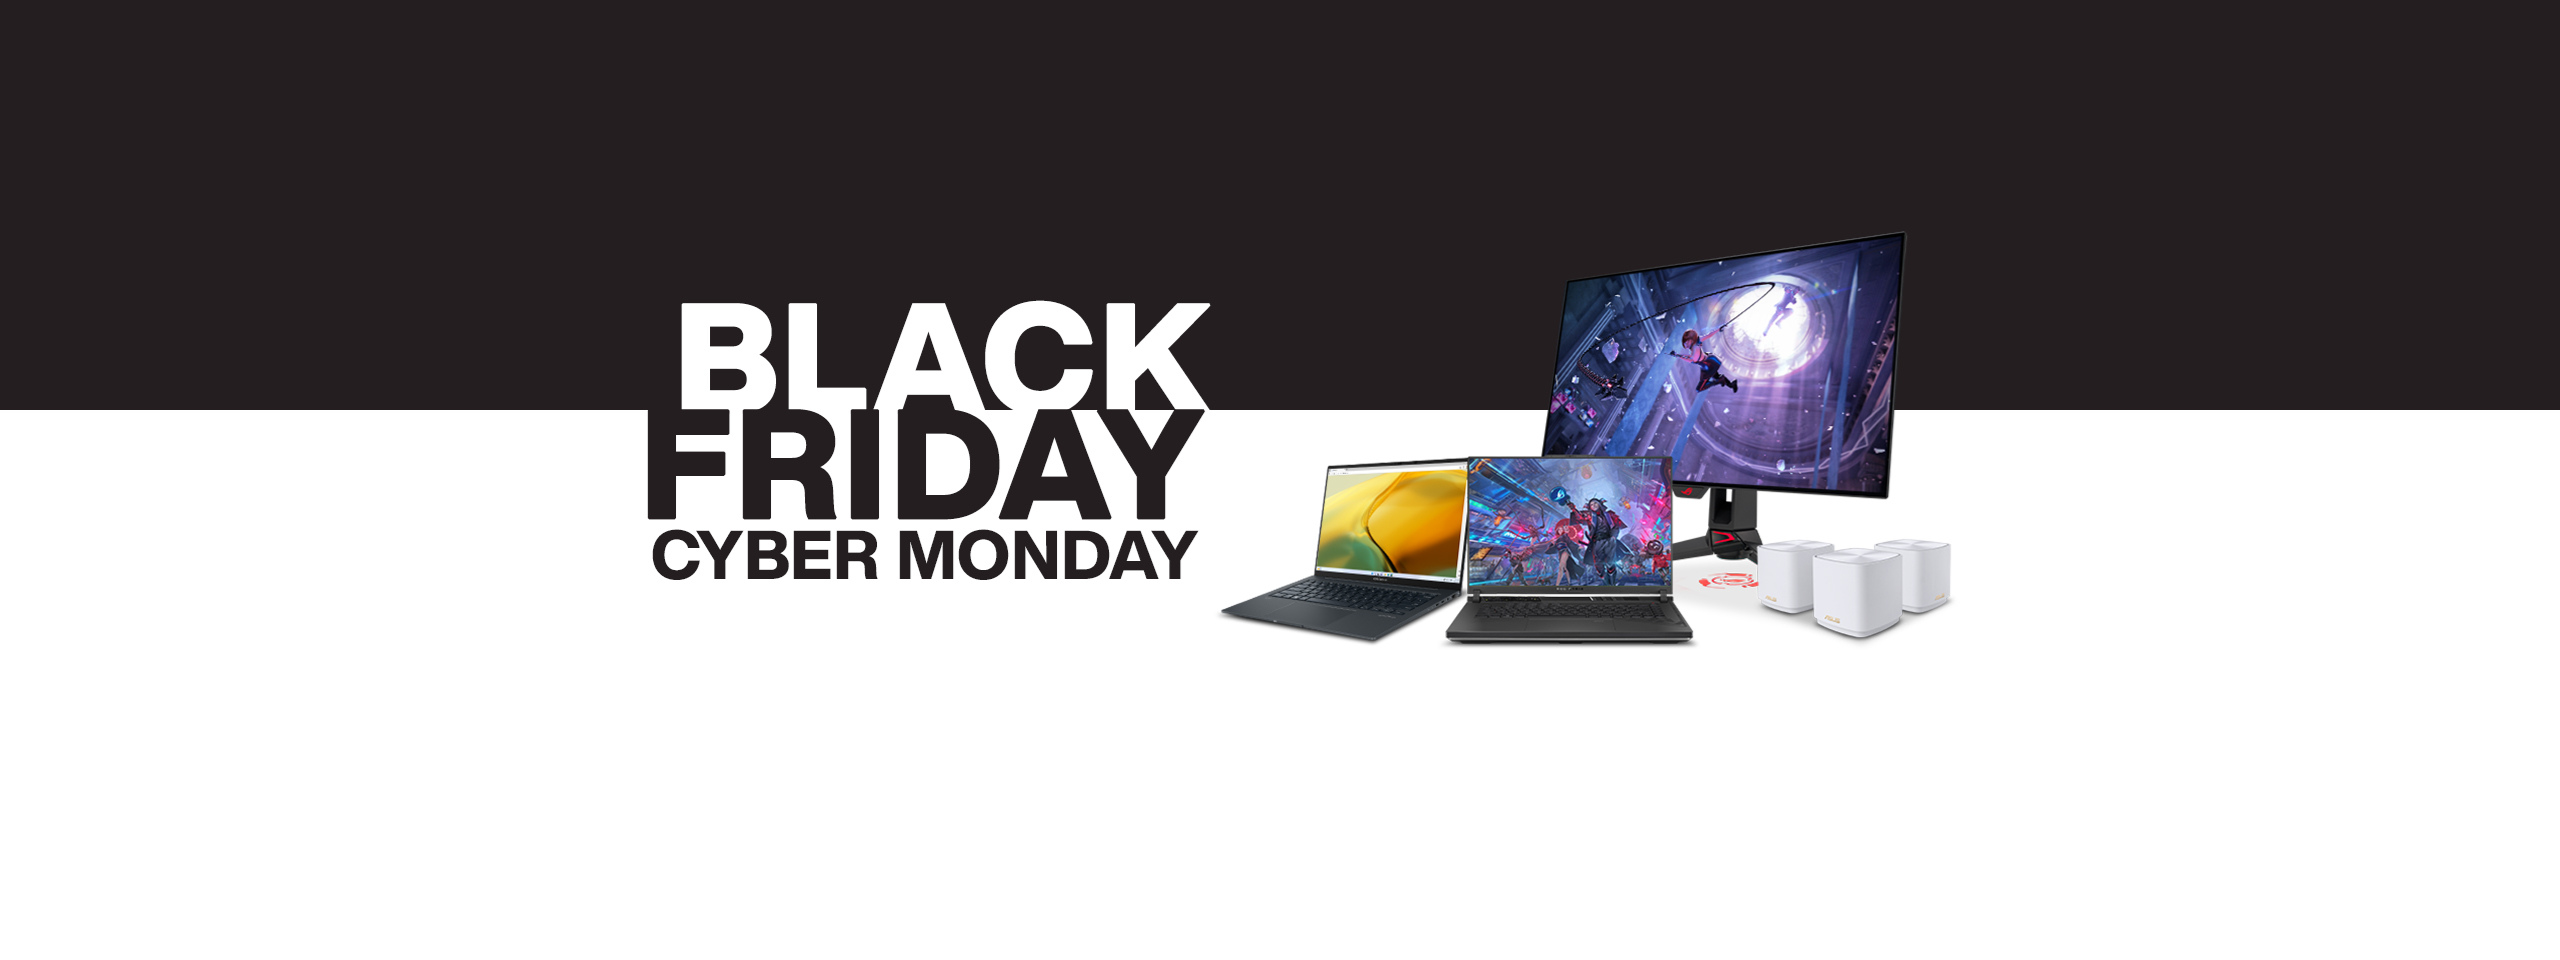 Get exclusive access to our best Black Friday and Cyber Monday Deals!